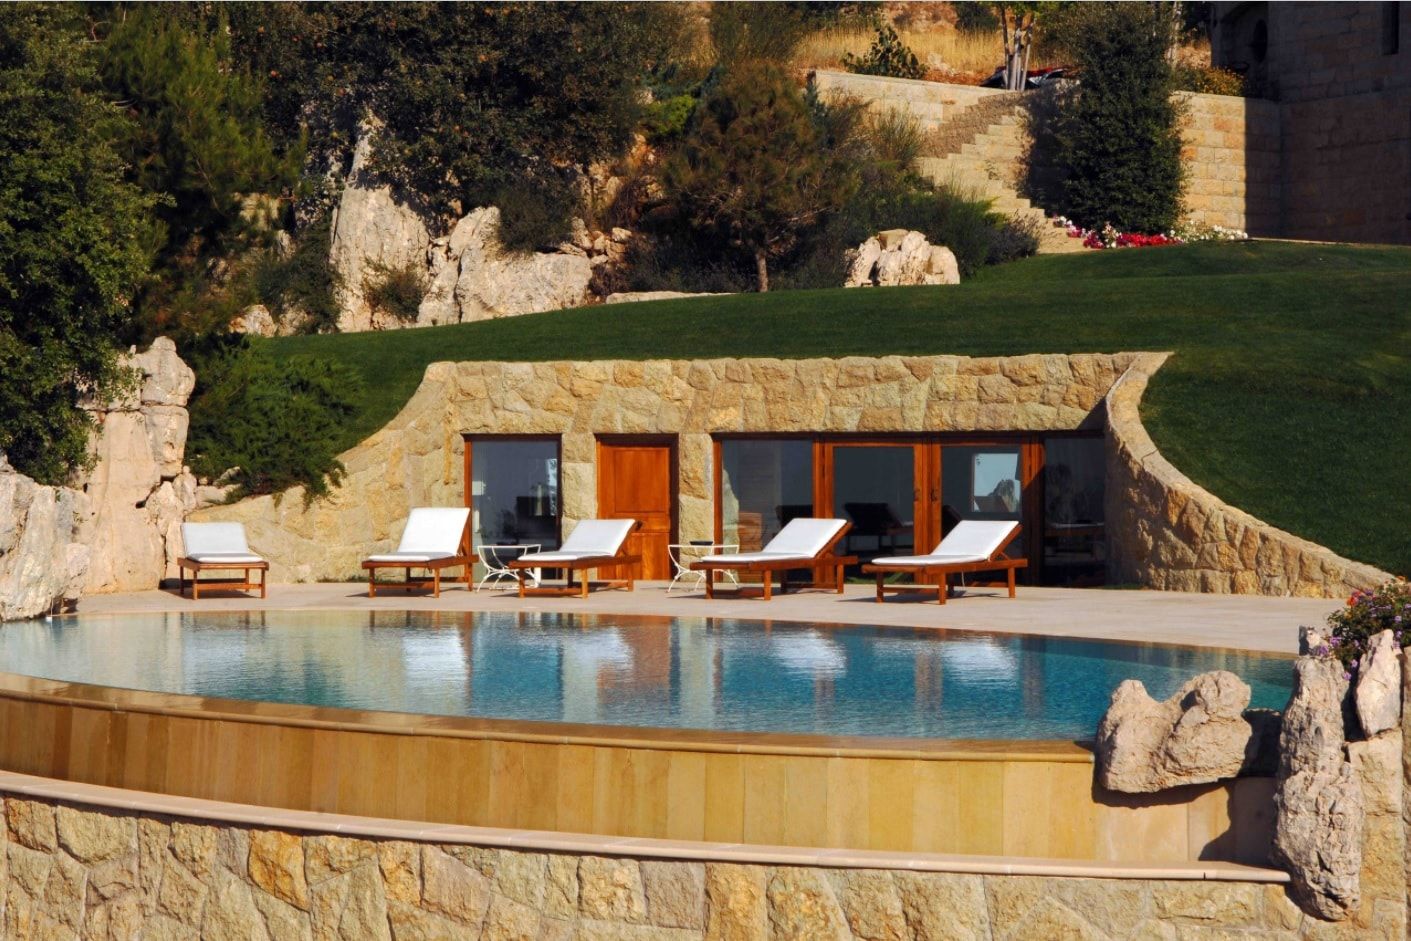 House Built Into Hill or Underground Houses. Poolside lounge zone surrounded by nature